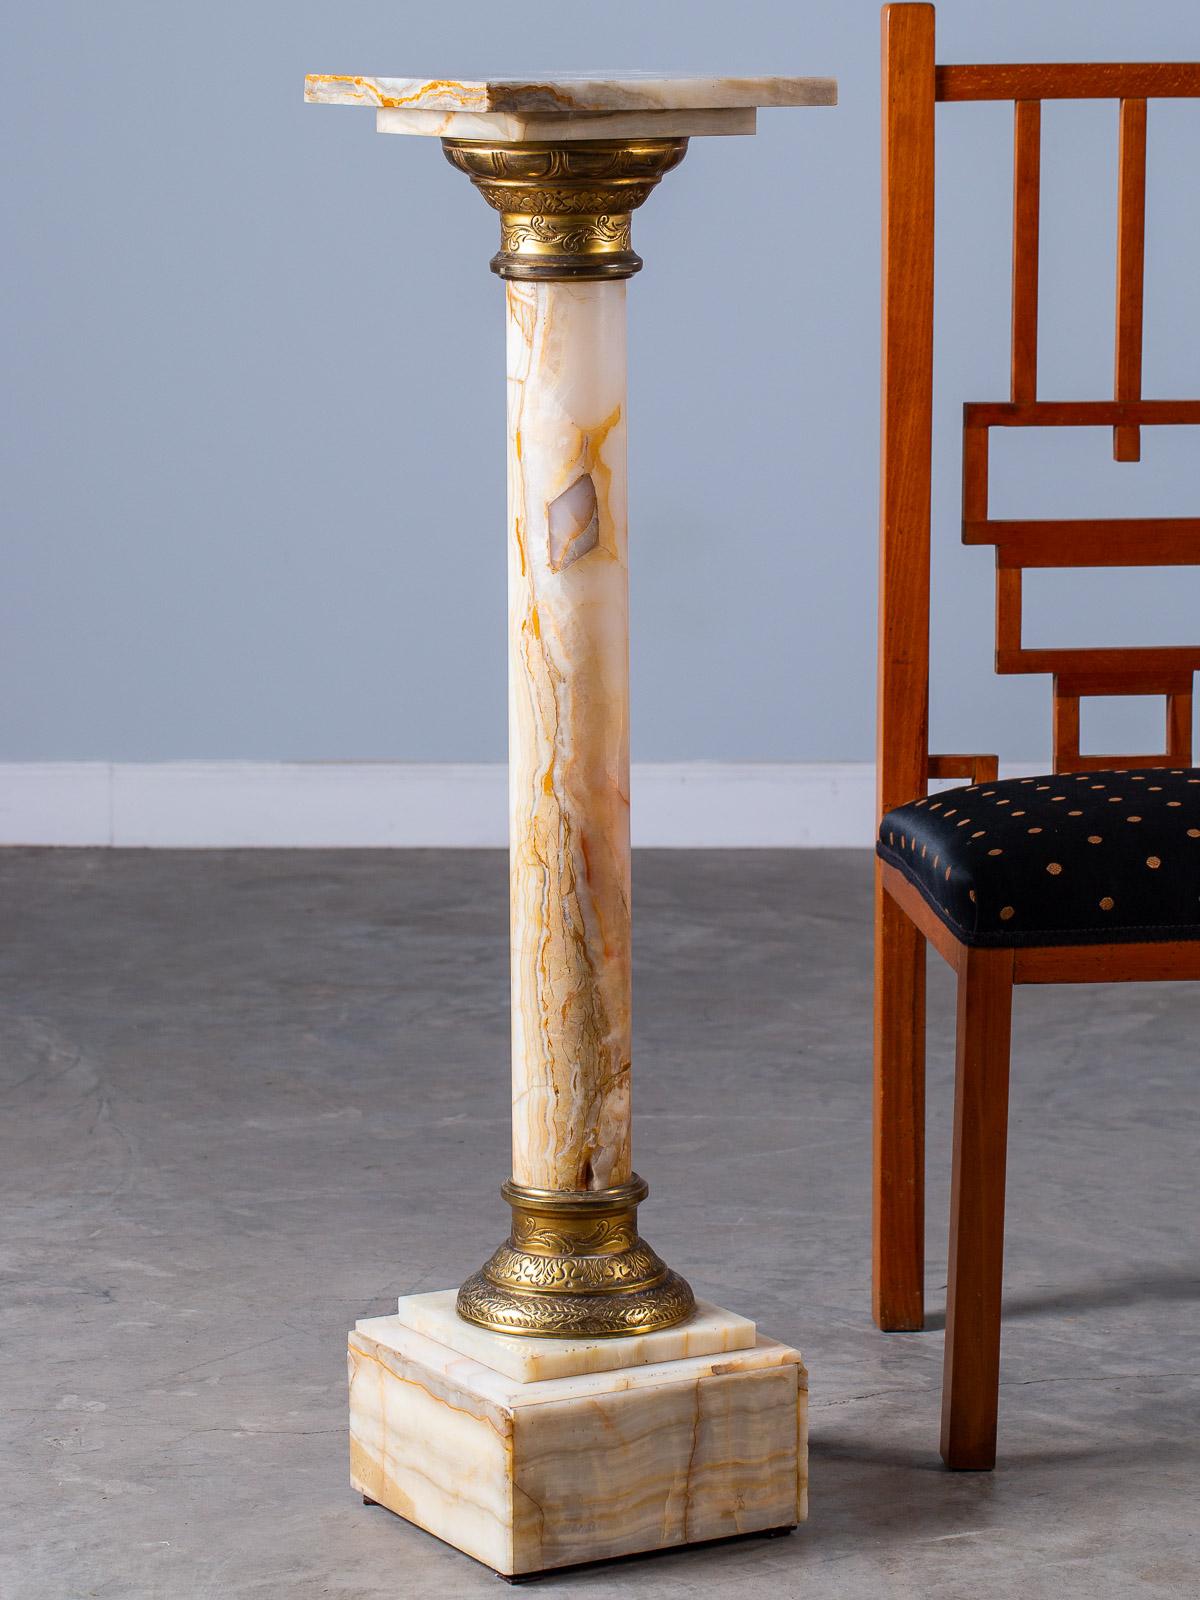 Antique Italian alabaster column pedestal with etched gilt bronze collars, circa 1890. This Classical style pedestal column is taken from examples seen in the ancient civilizations of Greece and Rome. Having a removable display top the slender